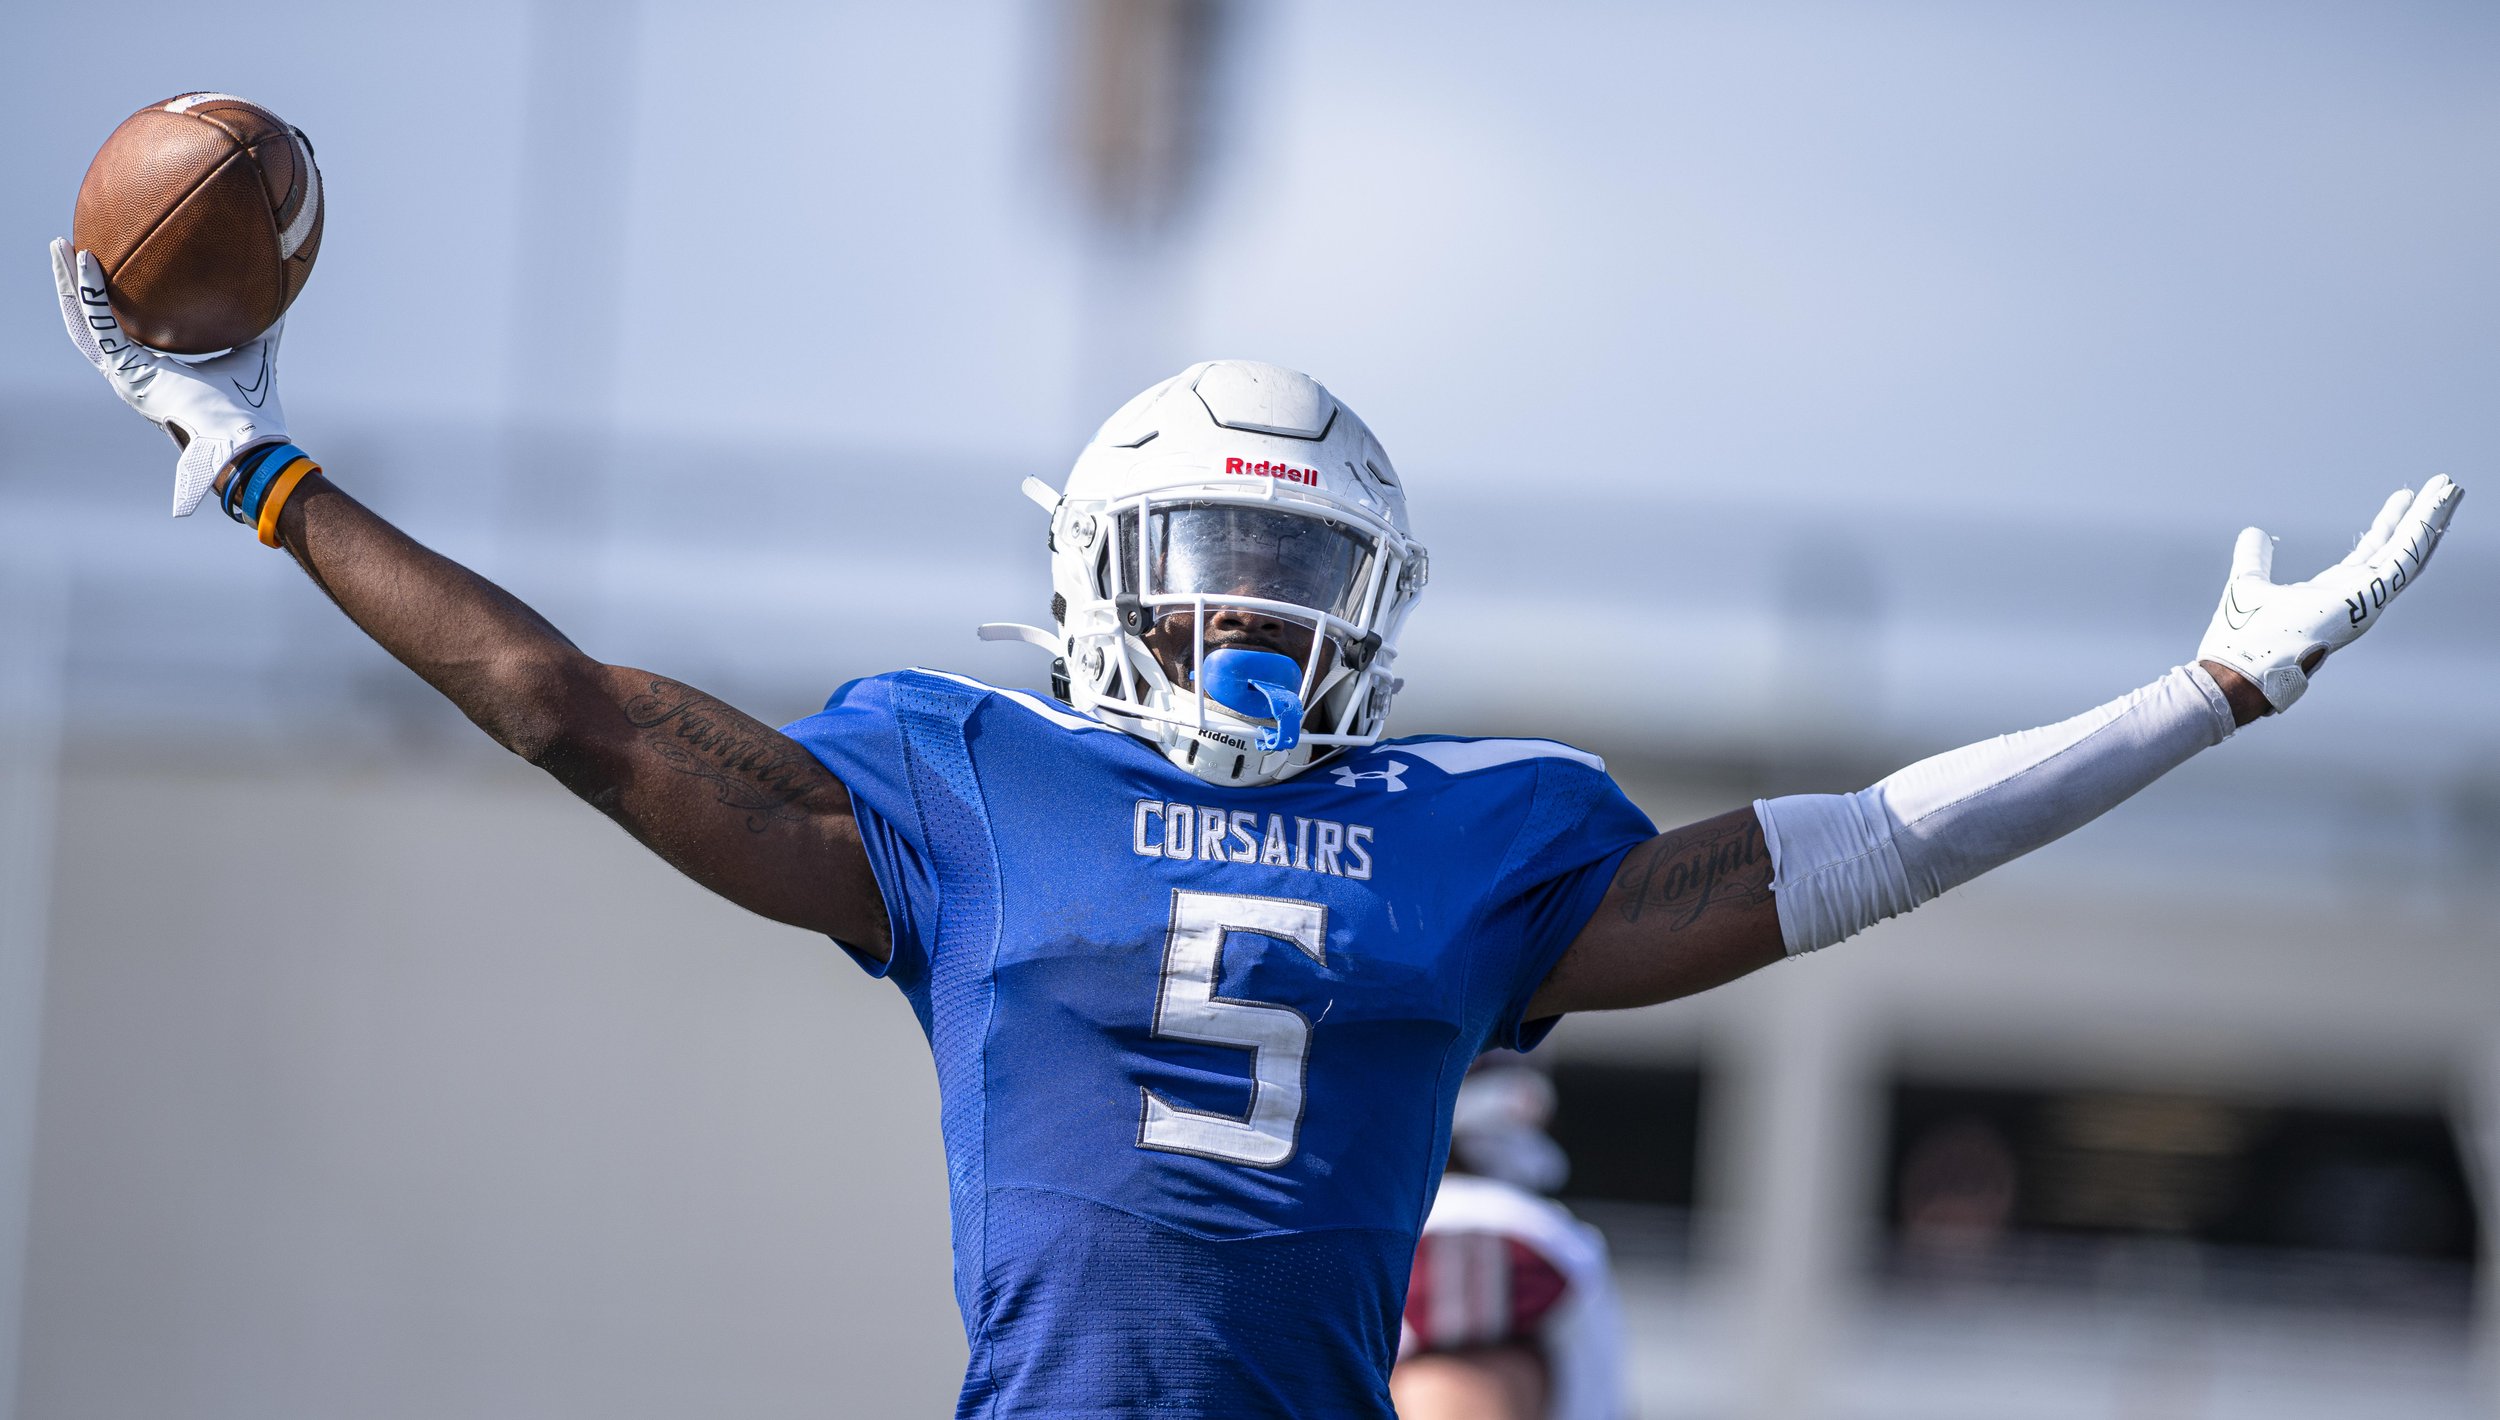  Santa Monica College Corsairs sophomore Wide-receiver Tariq Brown (5) celebrates making the "Touchdown" signal after scoring a crucial go ahead touchdown against Antelope Valley College. (Jon Putman | The Corsair) 